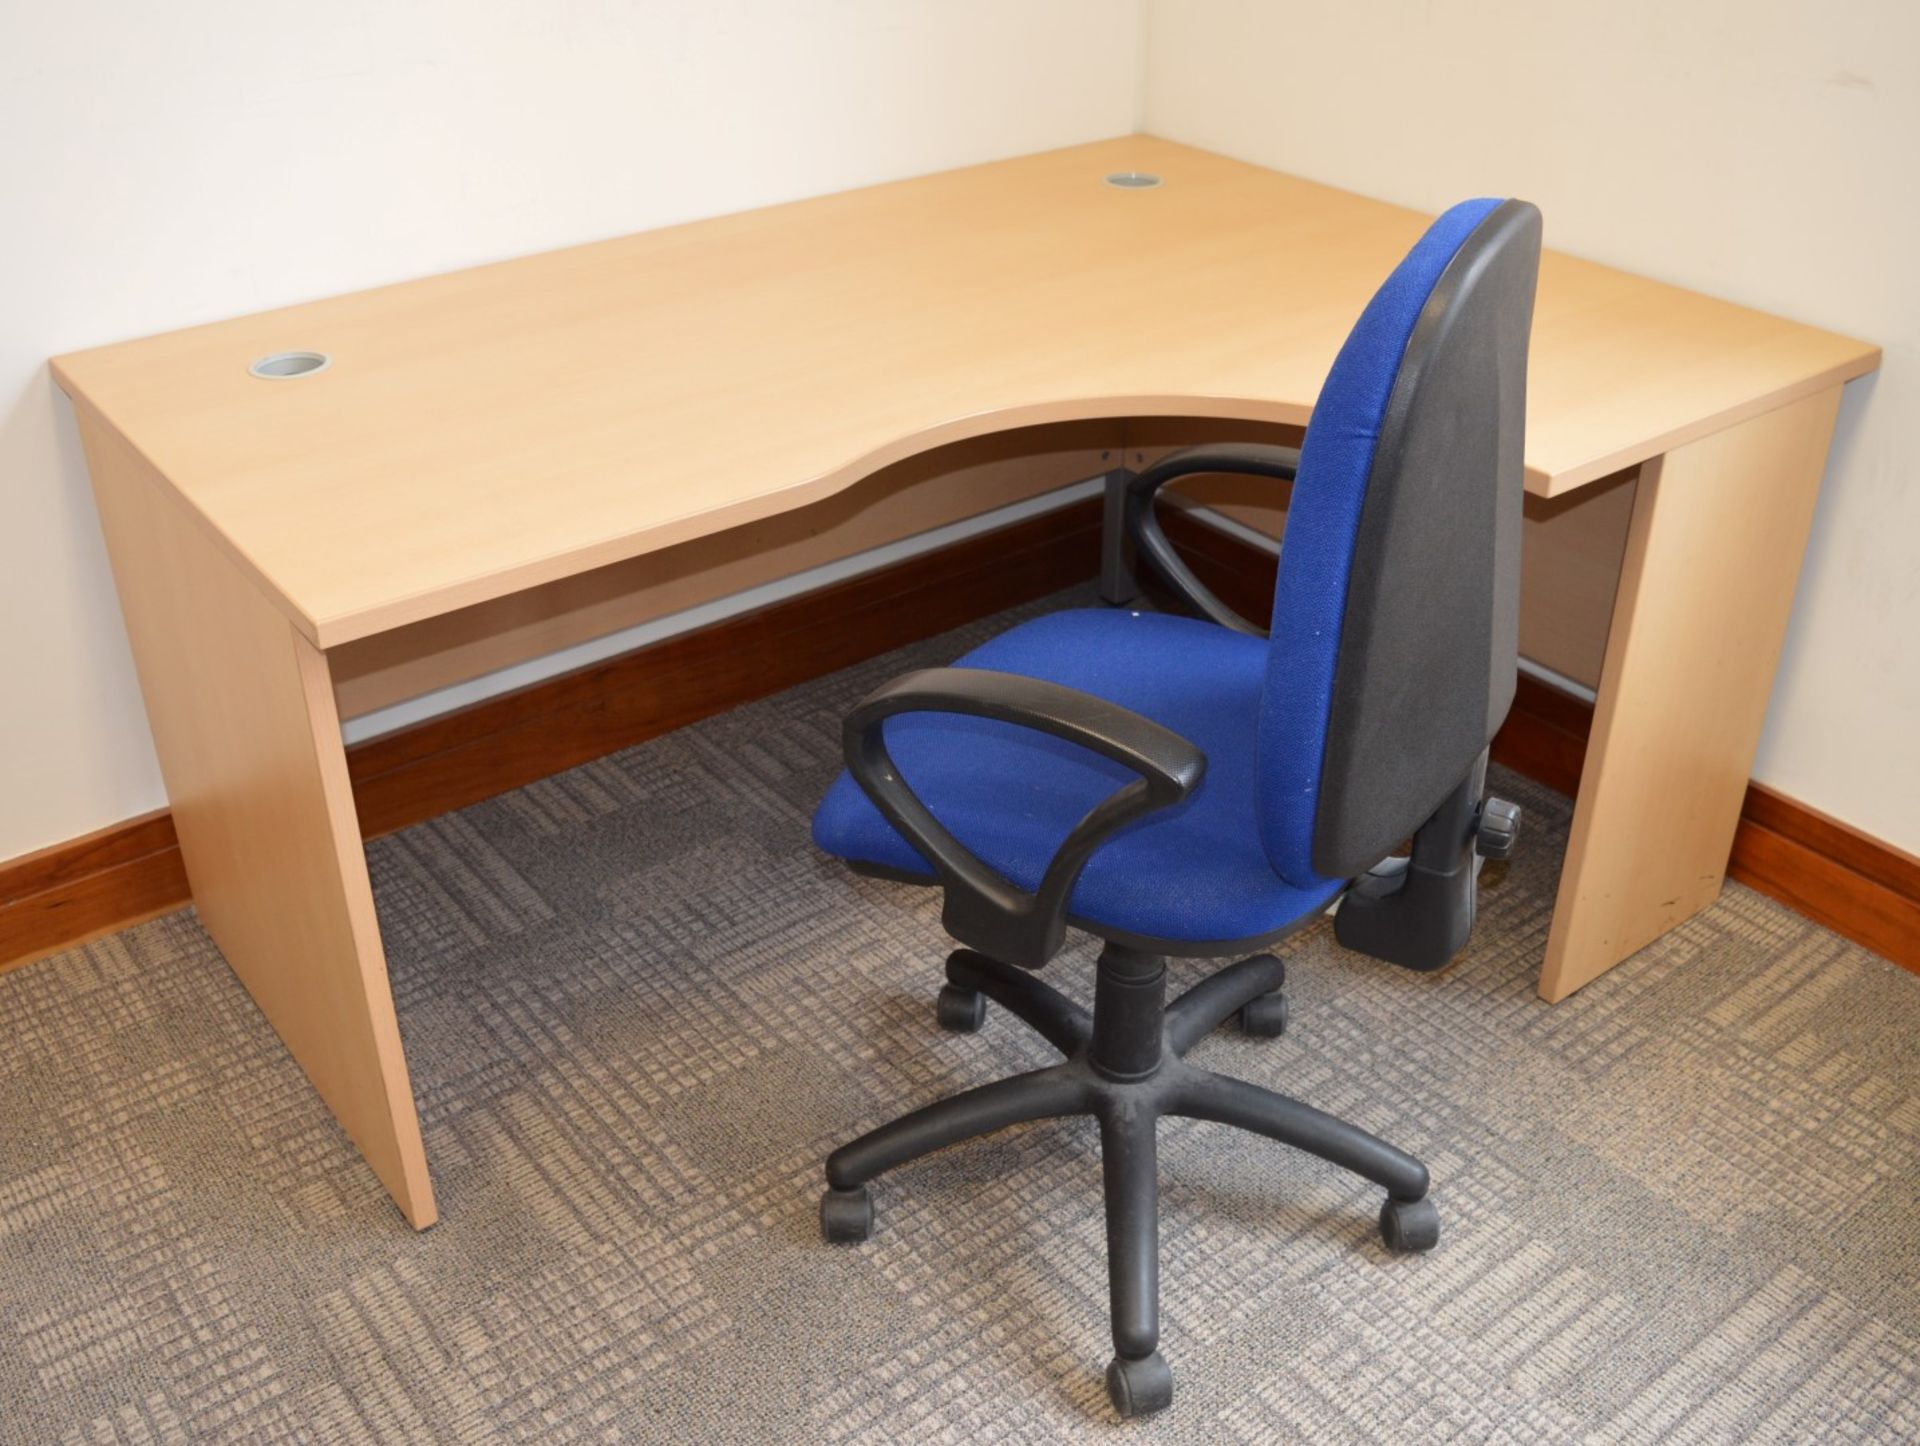 1 x Office Desk With Chair - Beech Right Hand Office Desk With Ergonomic Office Chair - H72 x W160 x